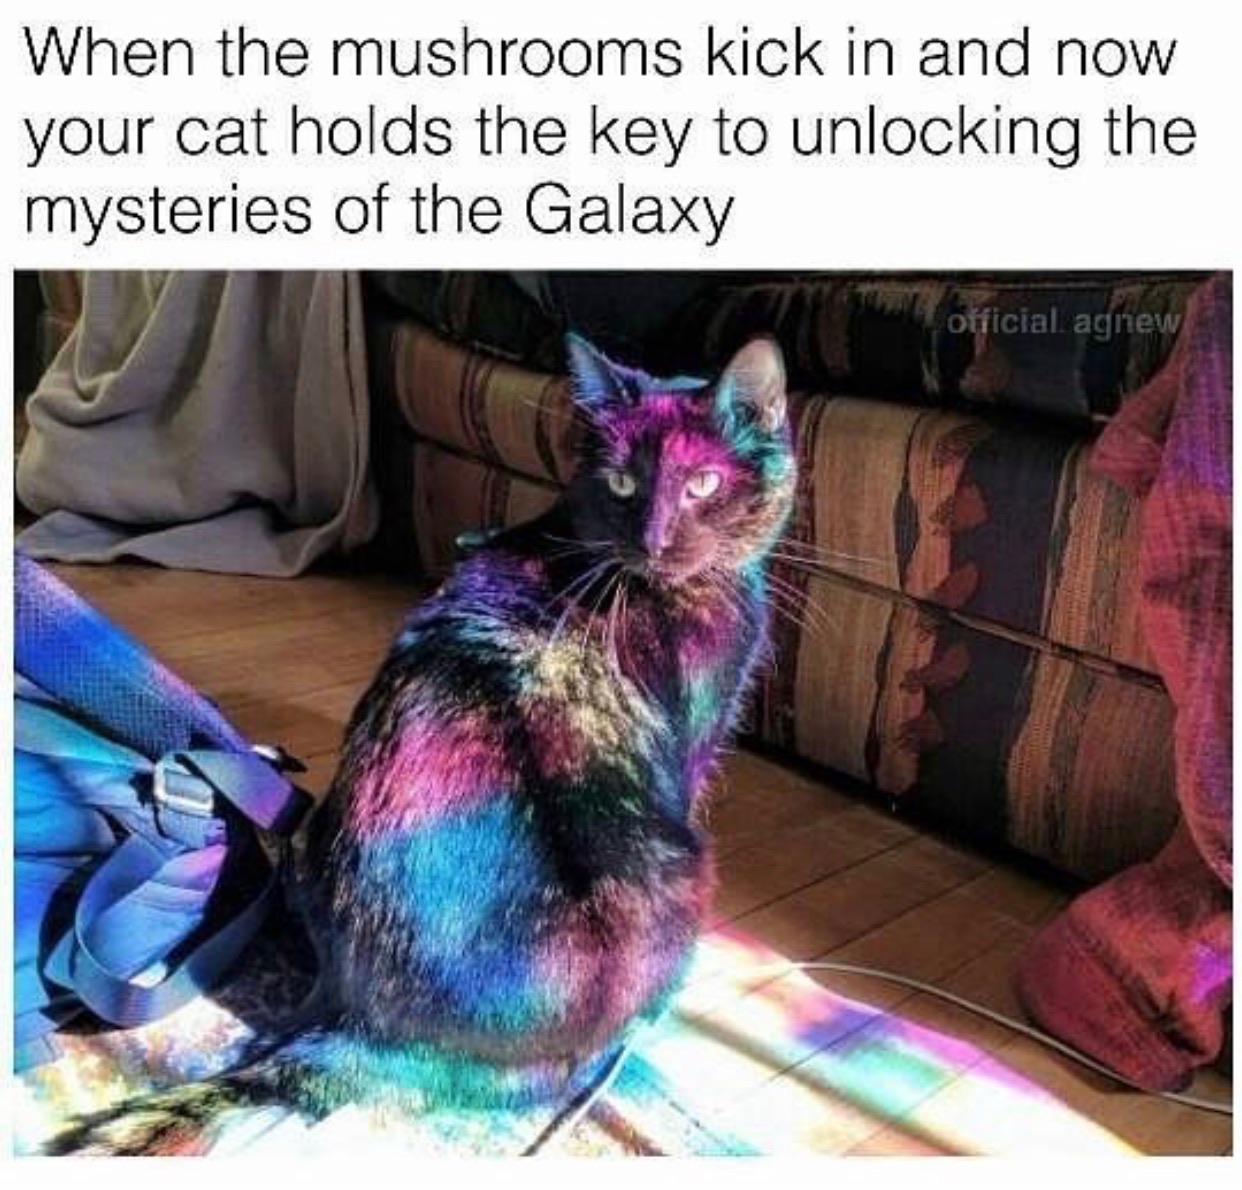 memes funny animals - When the mushrooms kick in and now your cat holds the key to unlocking the mysteries of the Galaxy official agnew